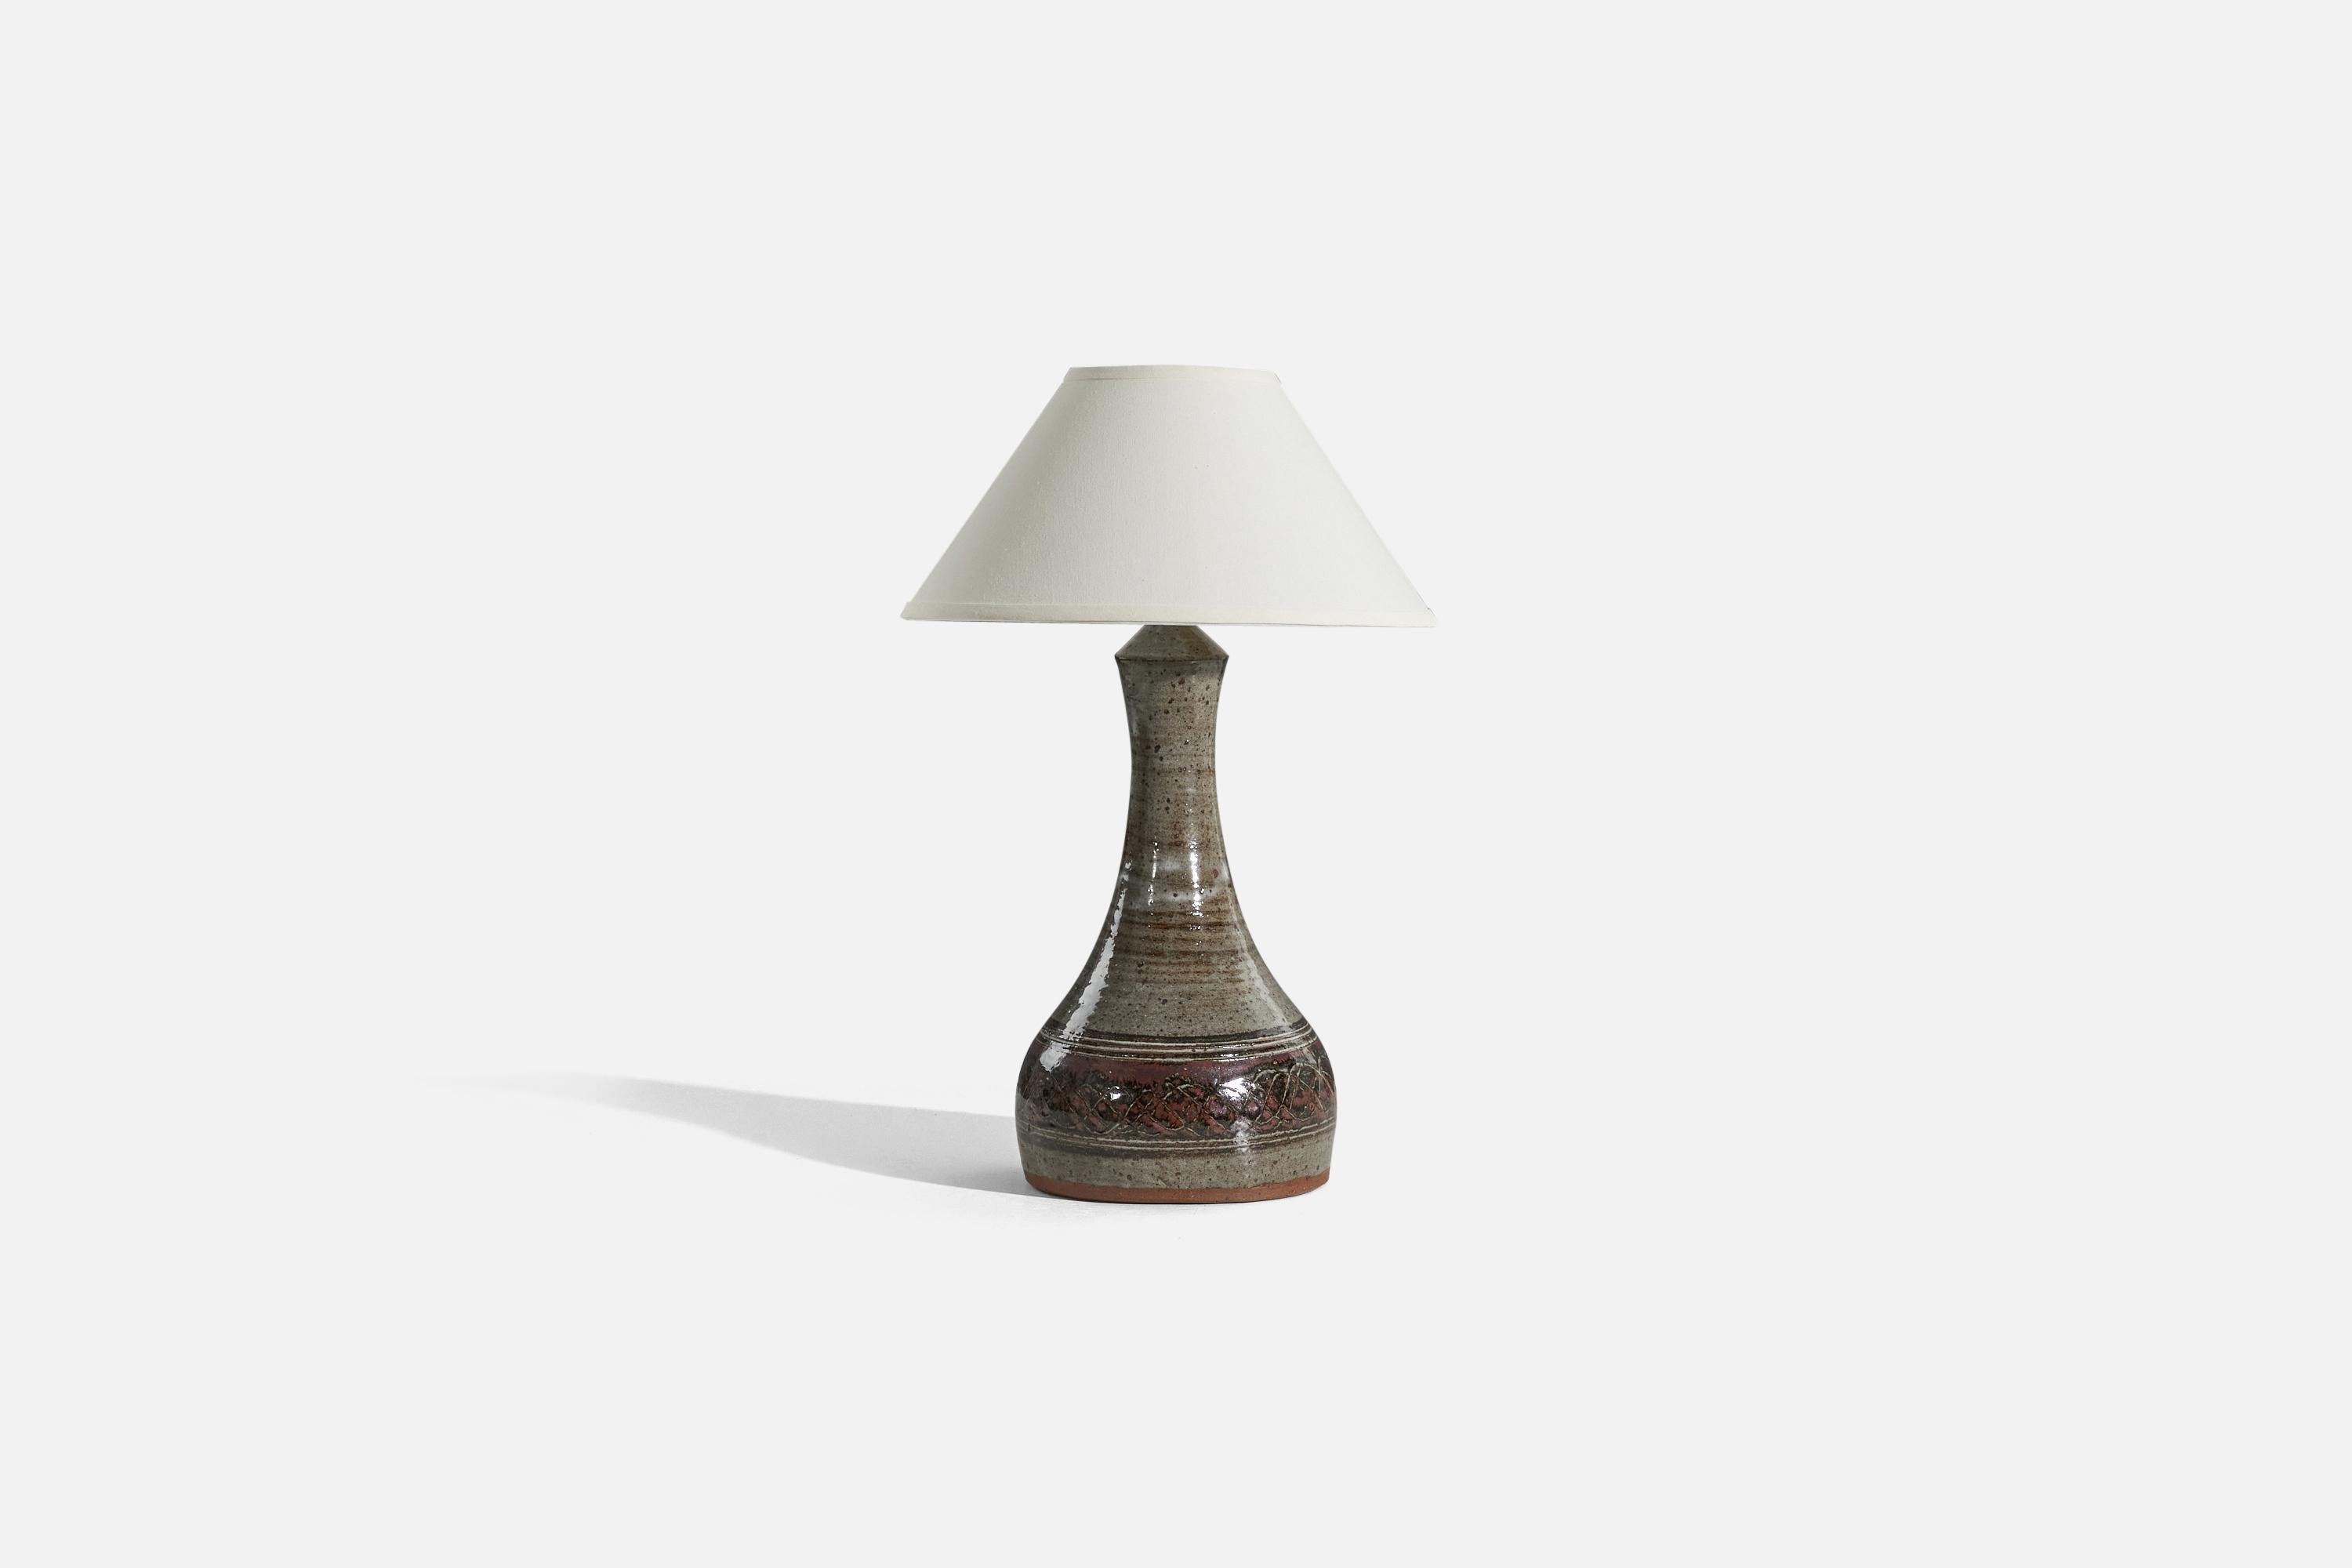 A grey and brown, glazed stoneware table lamp designed and produced by Helle Allpass, Denmark, 1960s.

Sold without lampshade. 
Dimensions of Lamp (inches) : 20.75 x 9 x 9 (H x W x D)
Dimensions of Shade (inches) : 6.125 x 16.375 x 9.25(T x B x